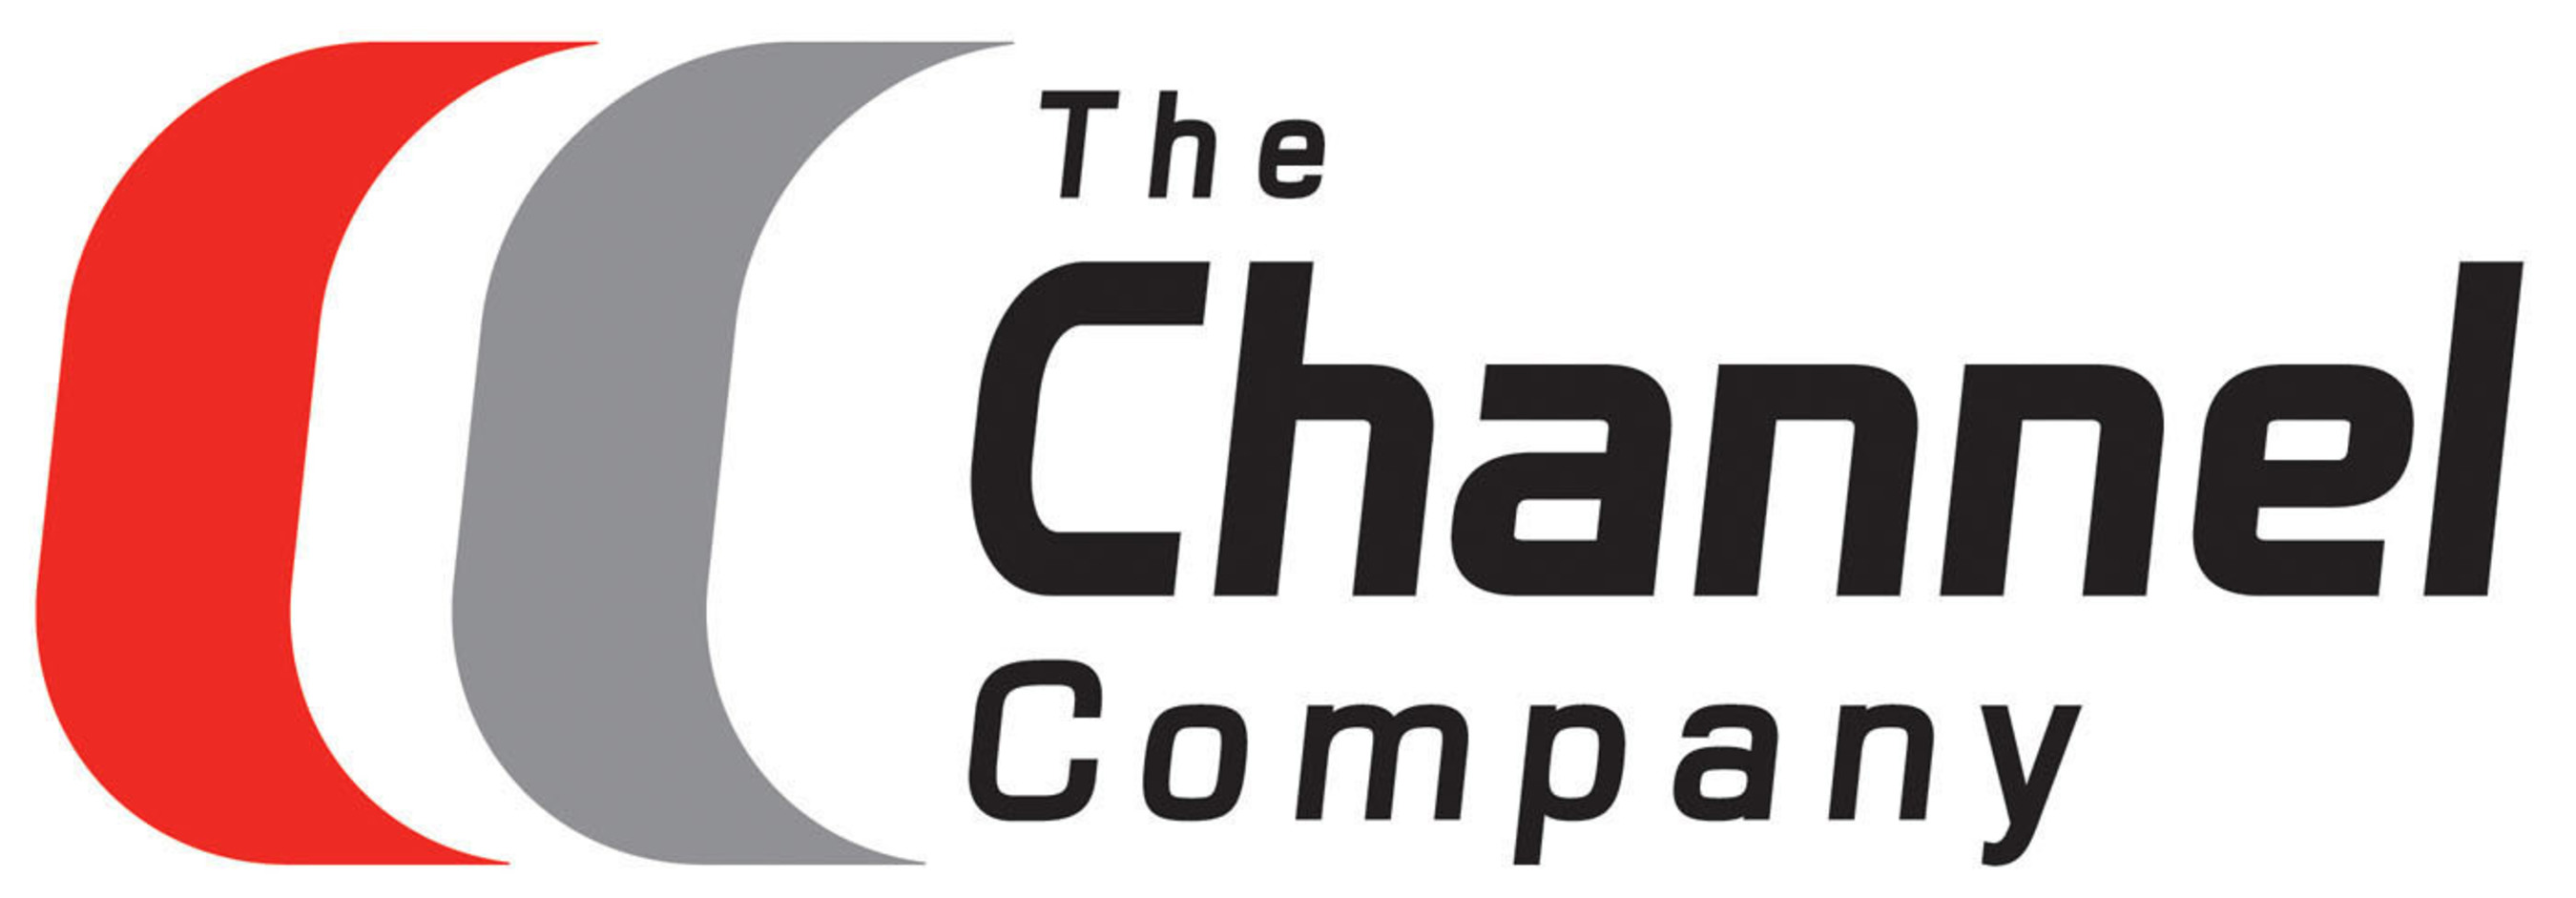 UBM Channel is now The Channel Company. (PRNewsFoto/UBM Channel) (PRNewsFoto/UBM CHANNEL)